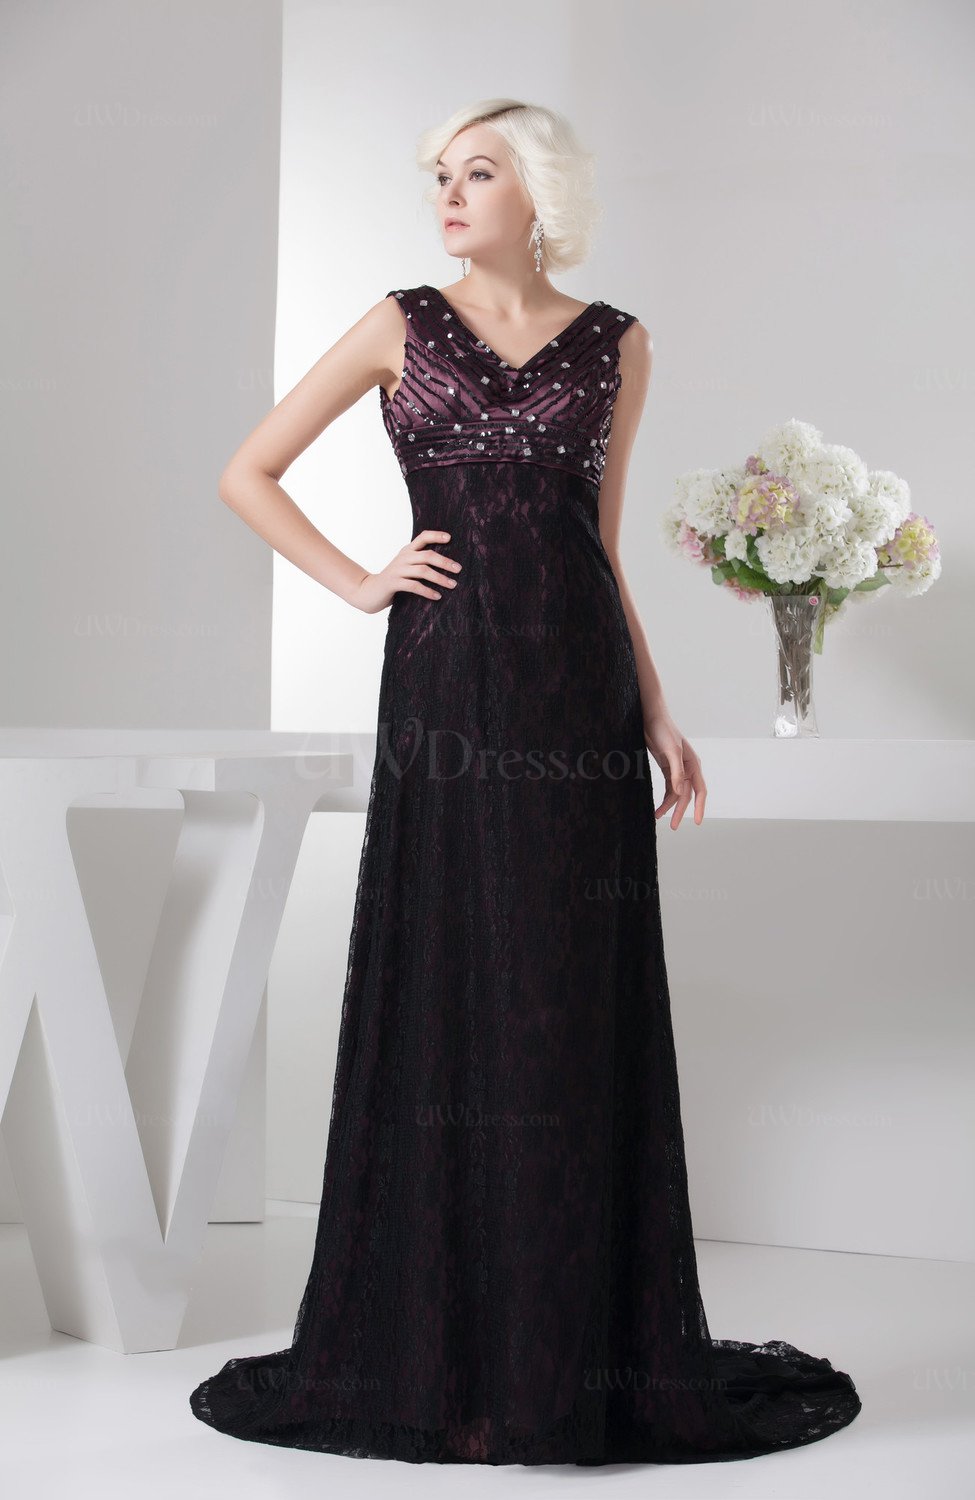 Lace Wedding Guest Dress Affordable Empire Spring Dream